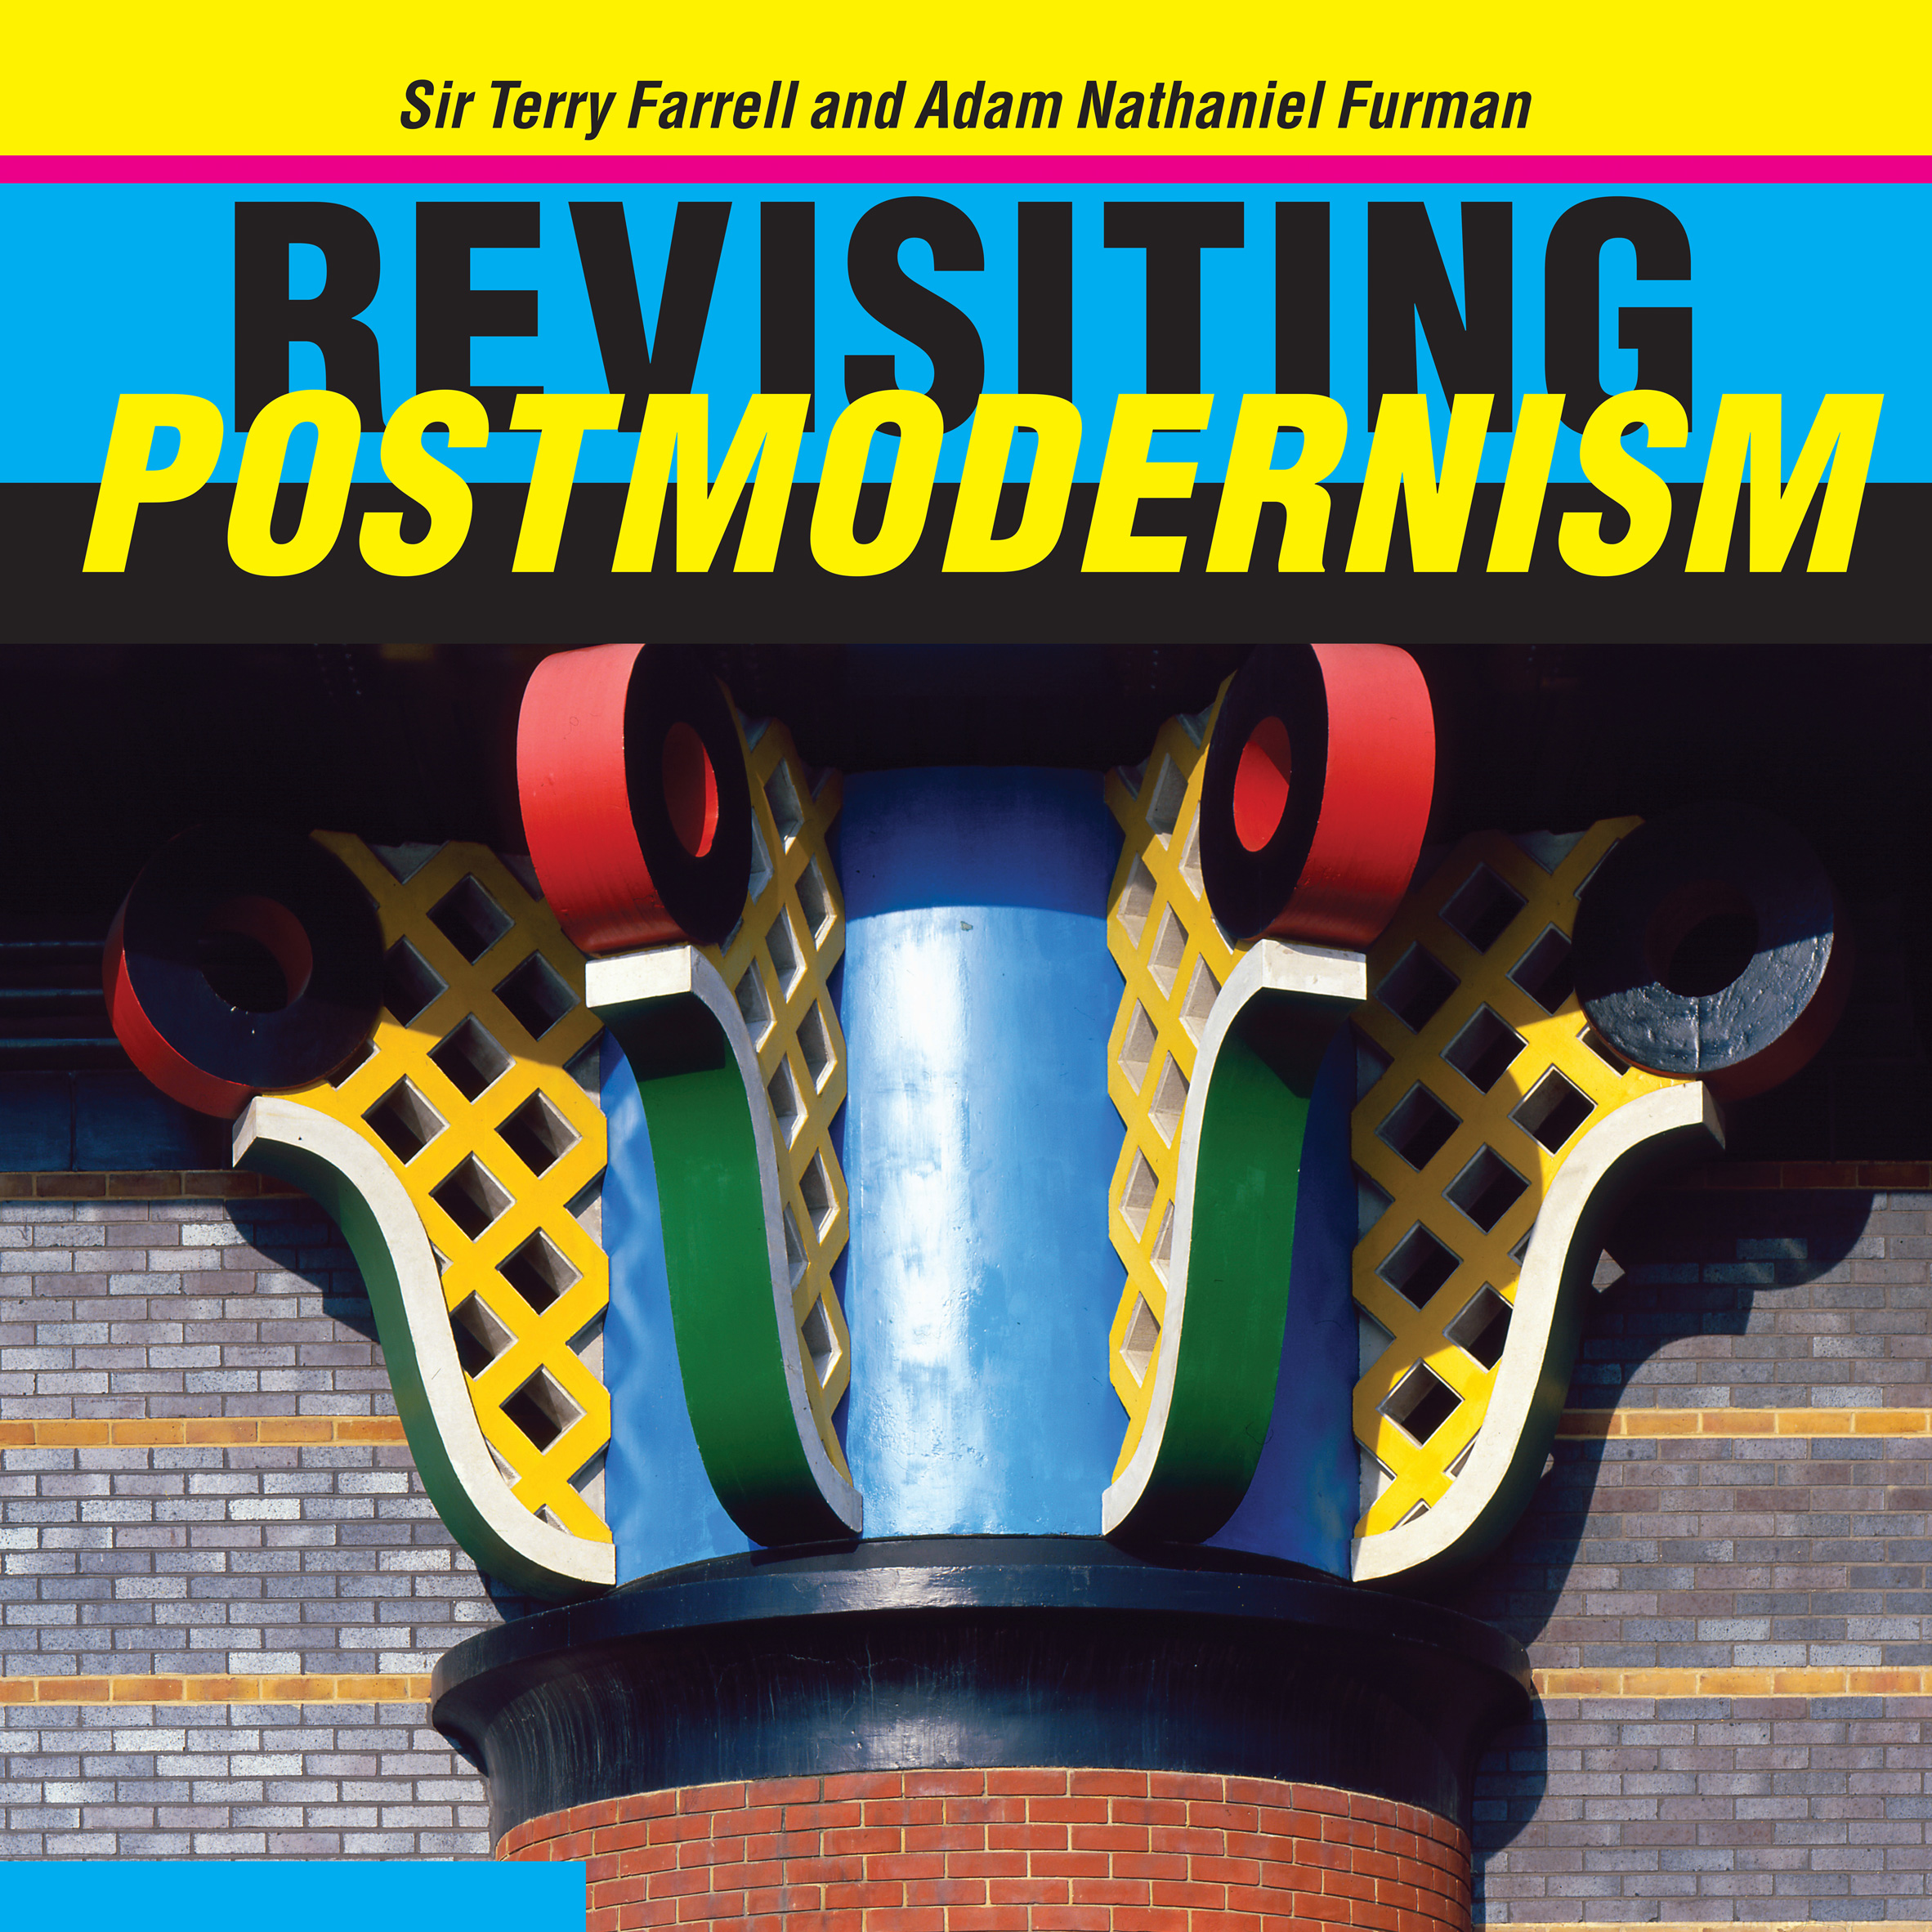 Revisiting Postmodernism is a careening joyride through 20th-century  architecture